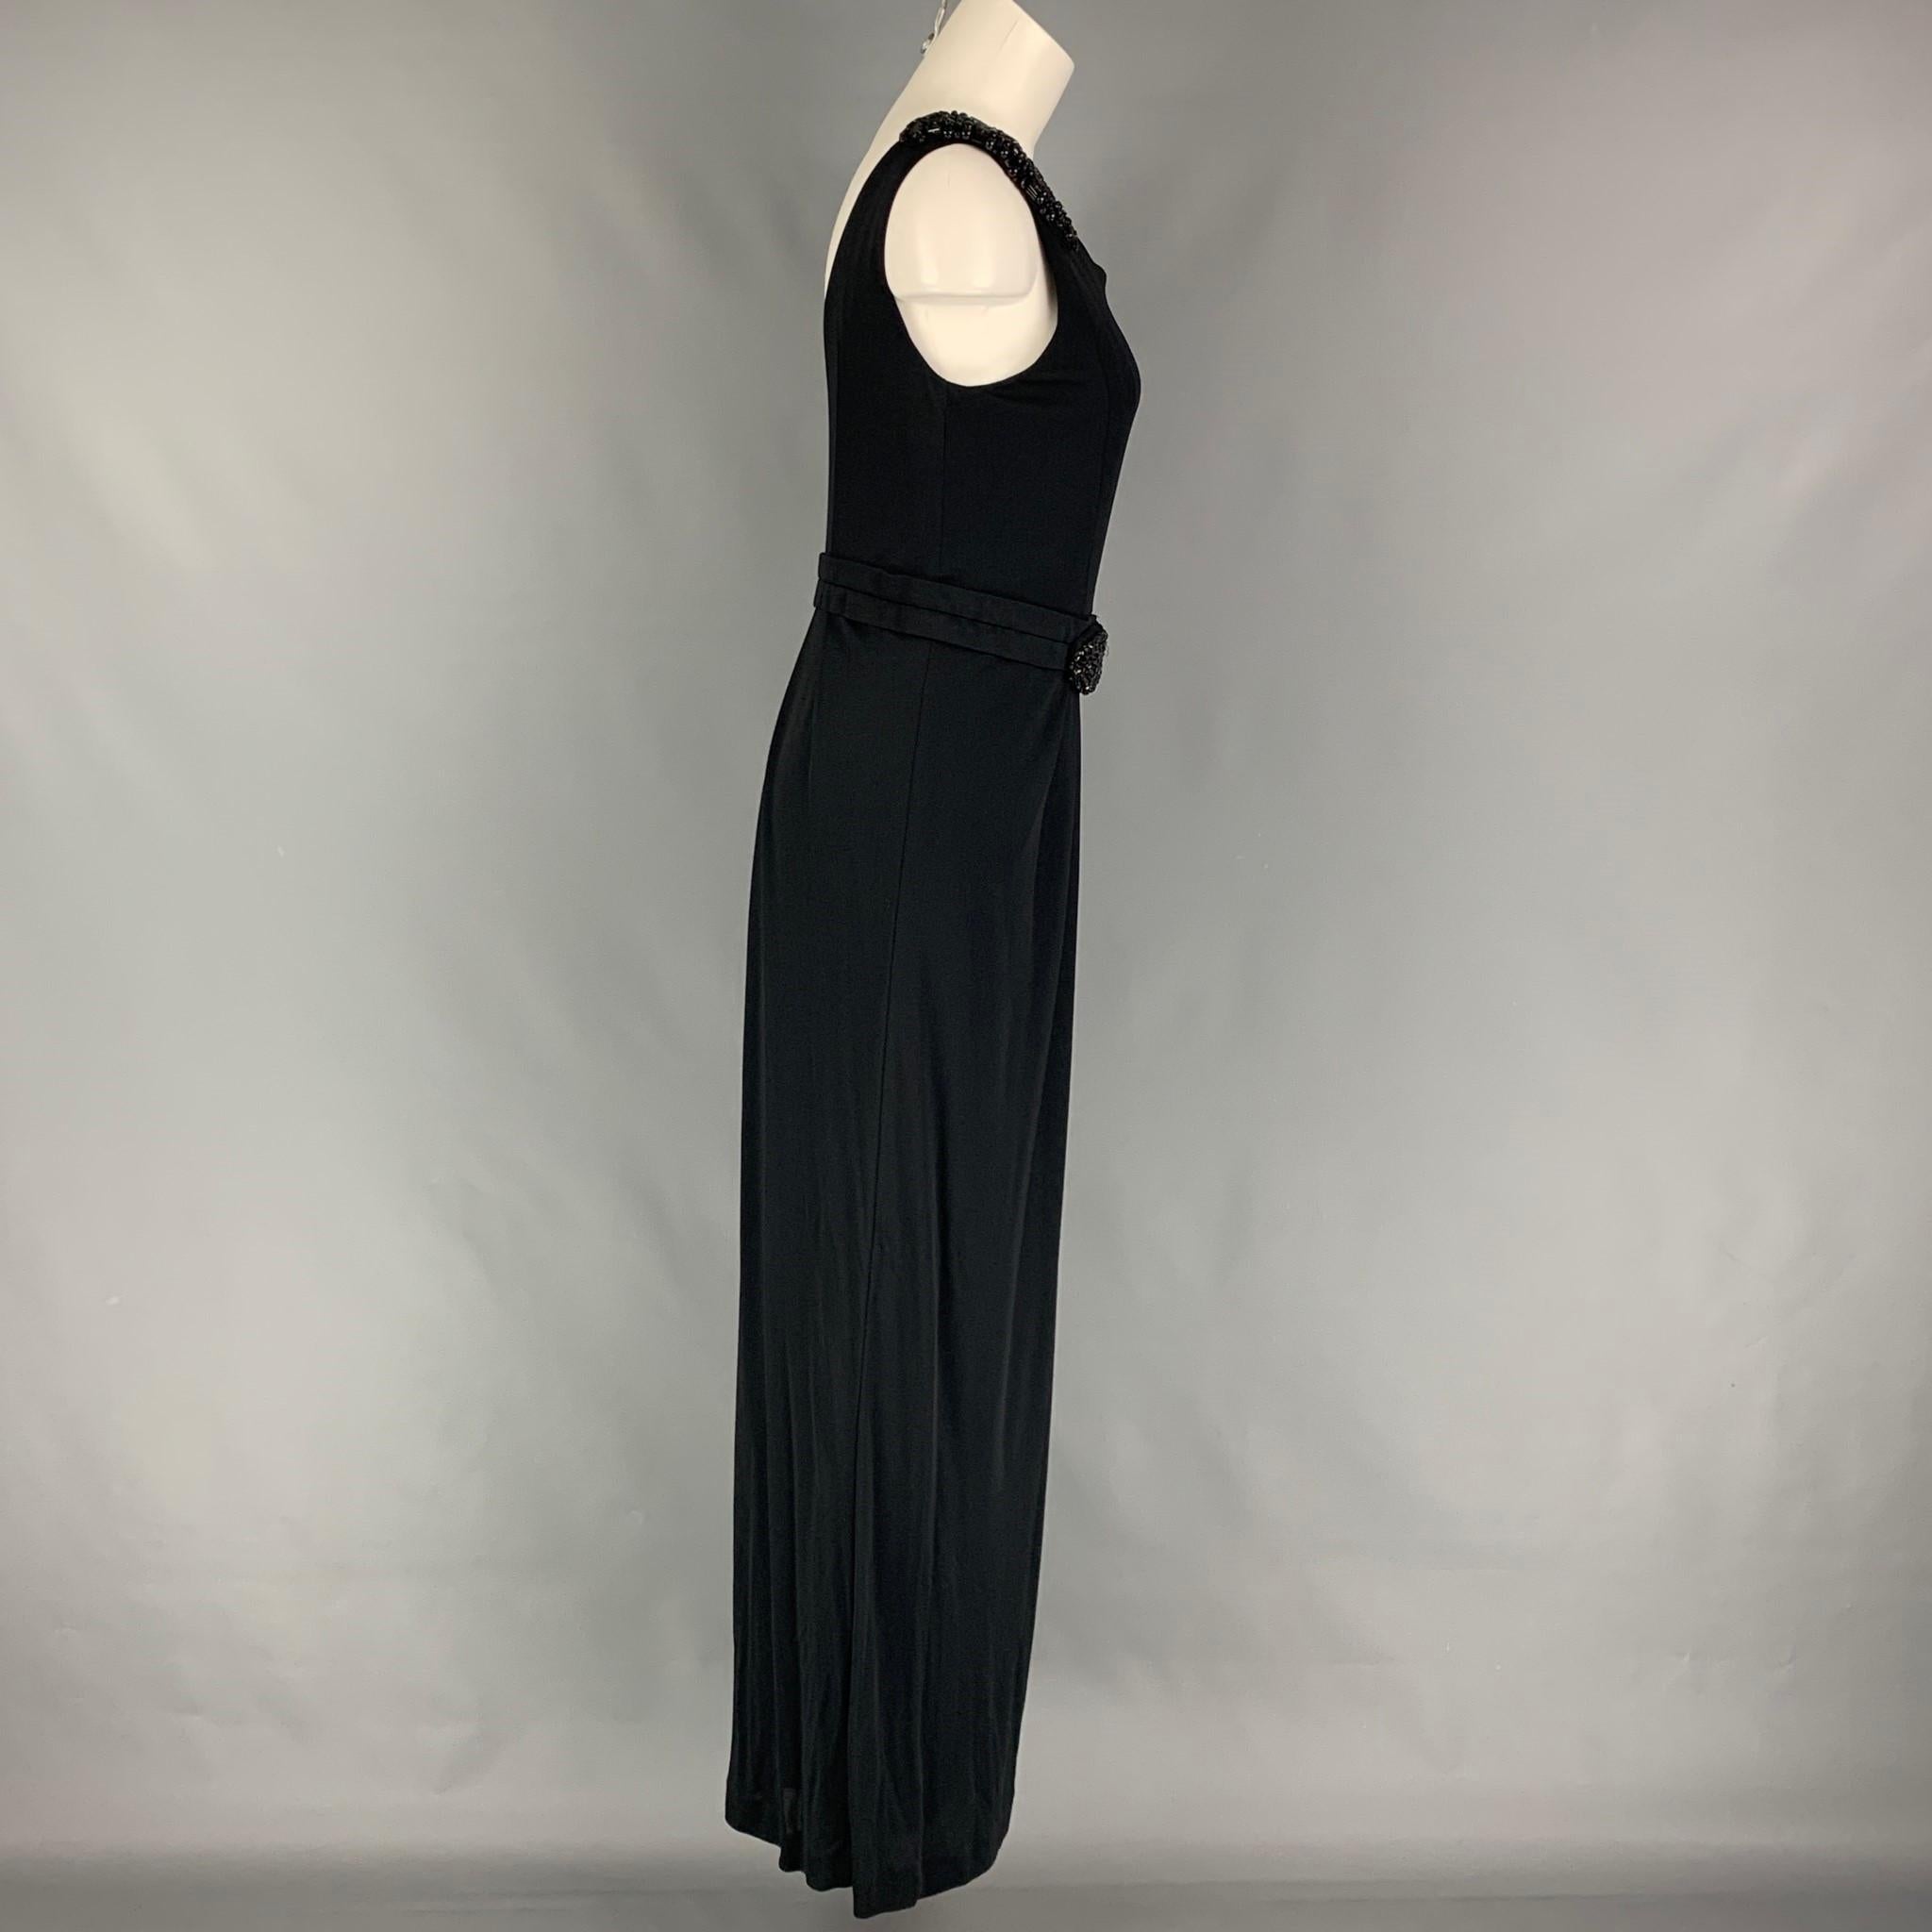 LA PERLA long dress comes in a black viscose /nylon featuring a sleeveless style, beaded embellishments, and a side zipper closure. 

Very Good Pre-Owned Condition.
Marked: 44

Measurements:

Bust: 30 in.
Waist: 28 in.
Hip: 32 in.
Length: 59 in. 